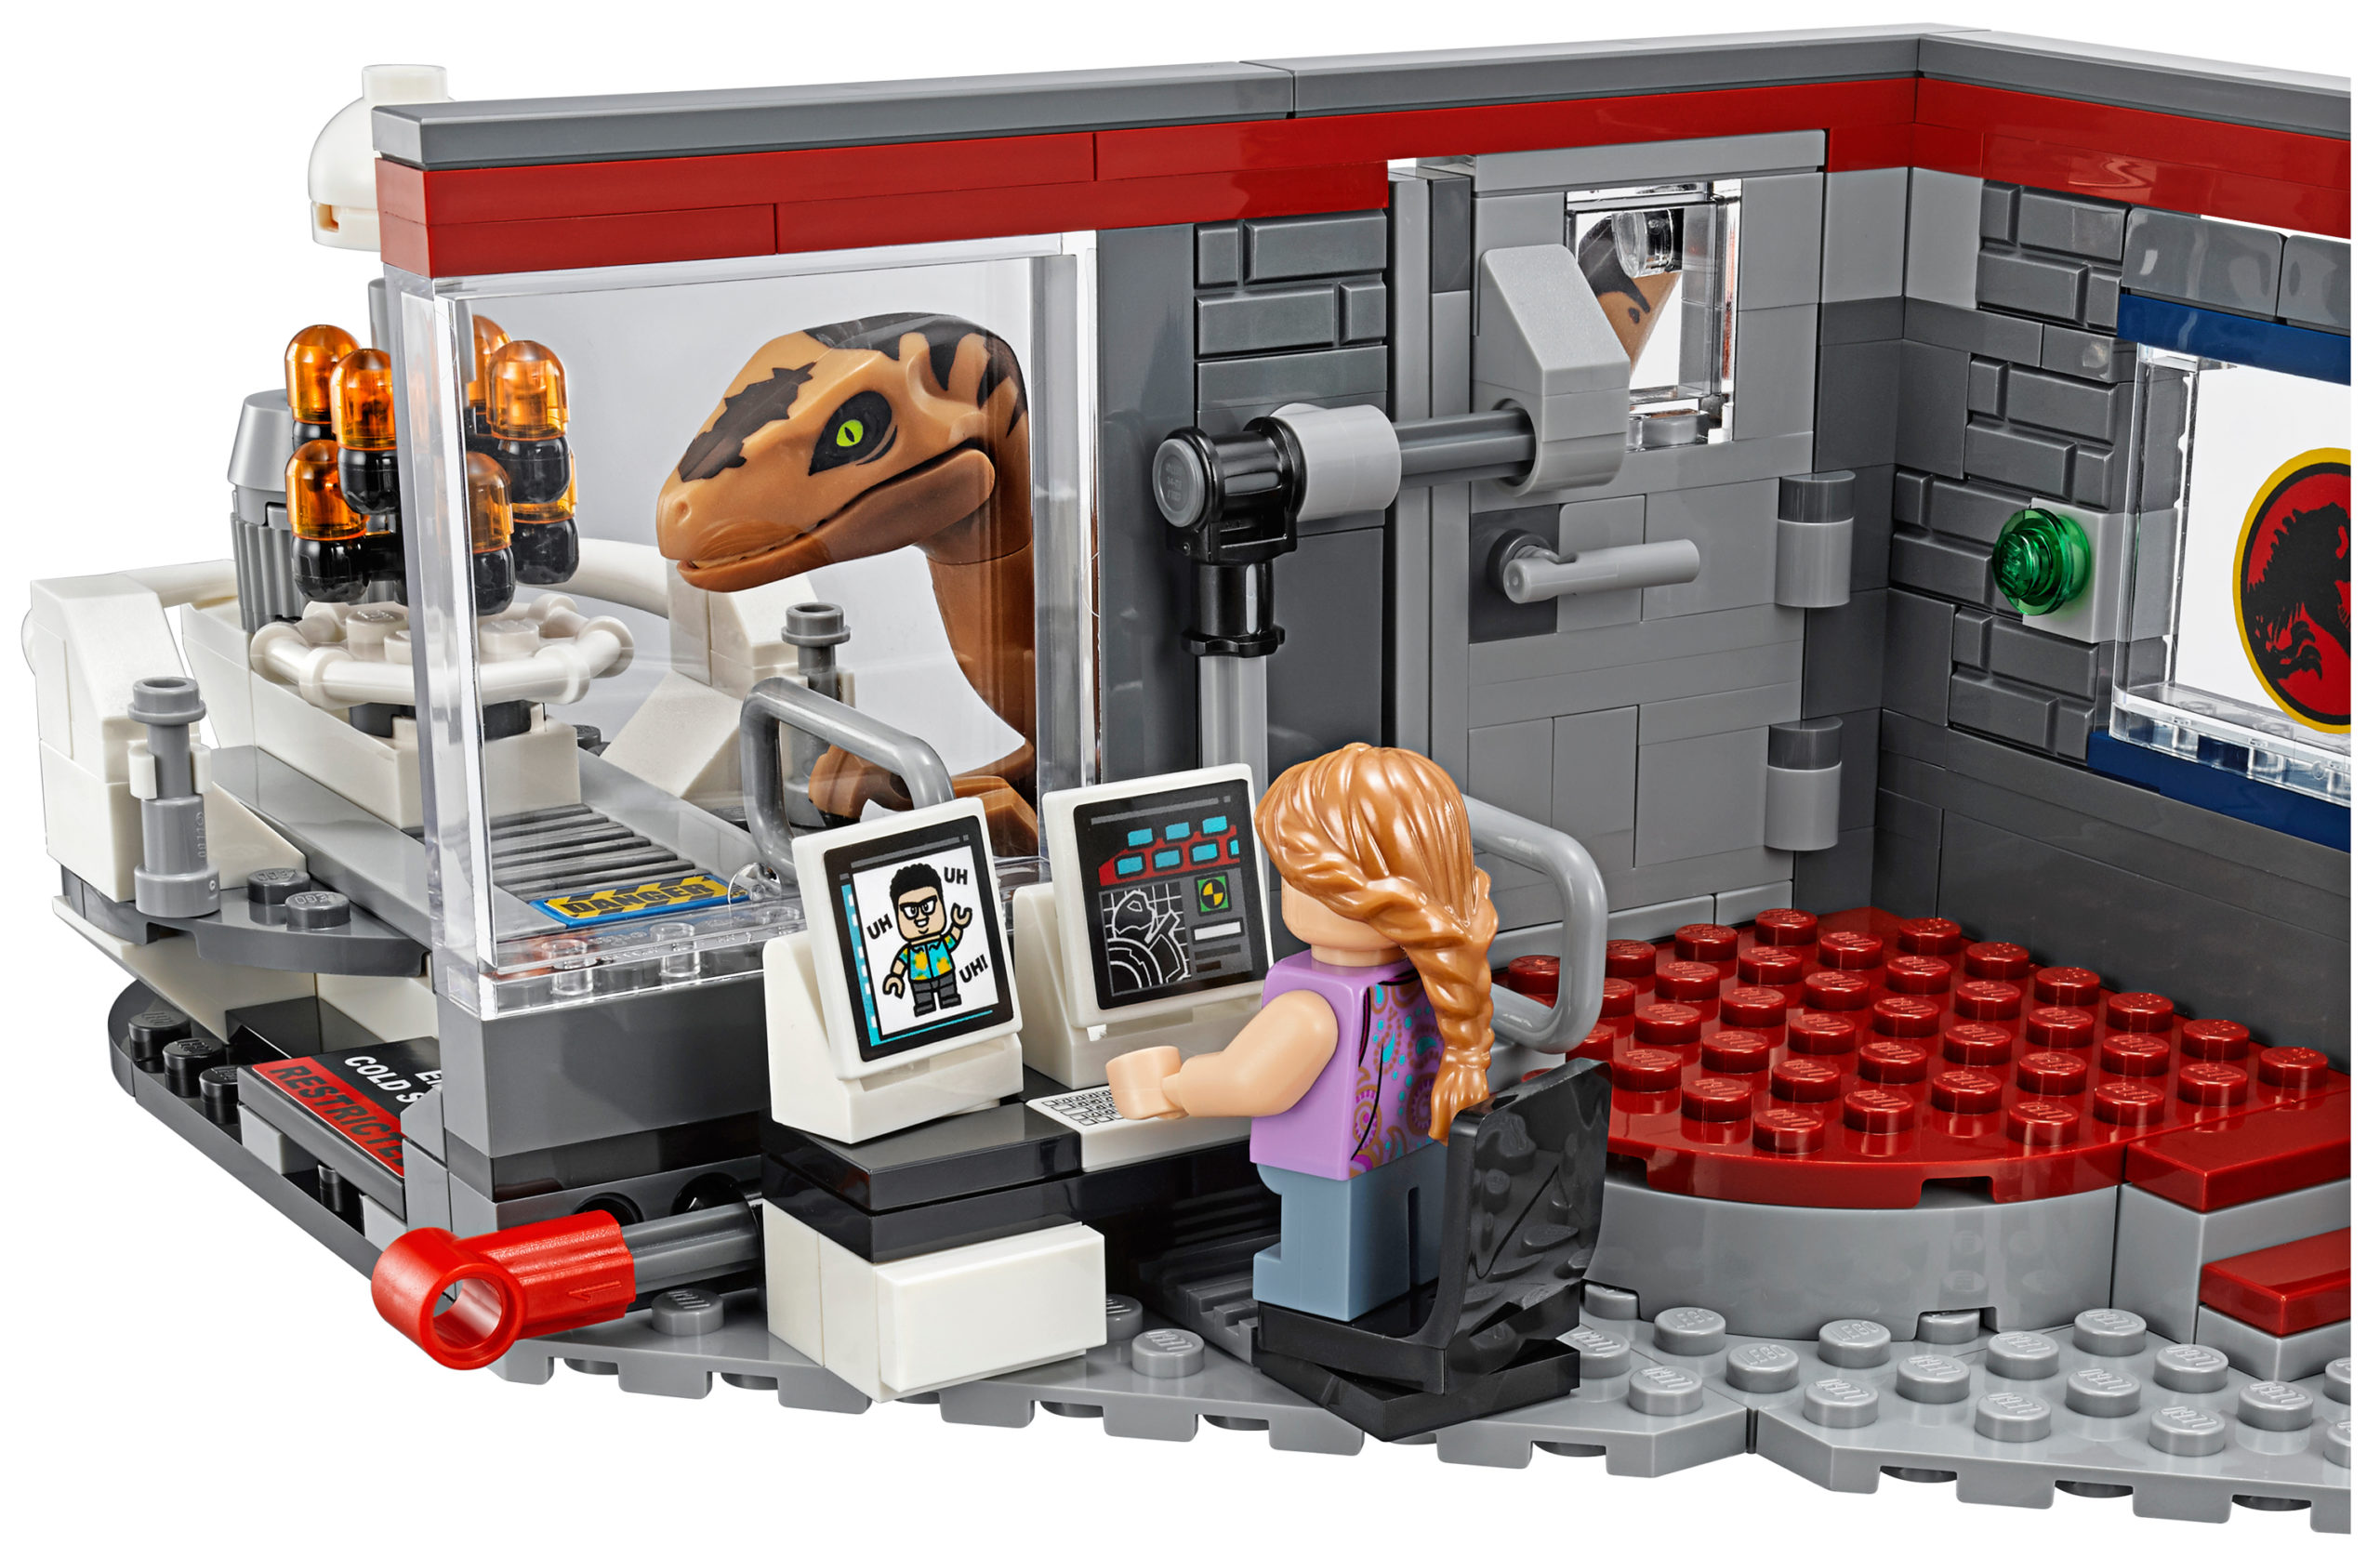 LEGO Has Finally Given Me The Jurassic Park LEGO Set I Wanted 25 Years Ago